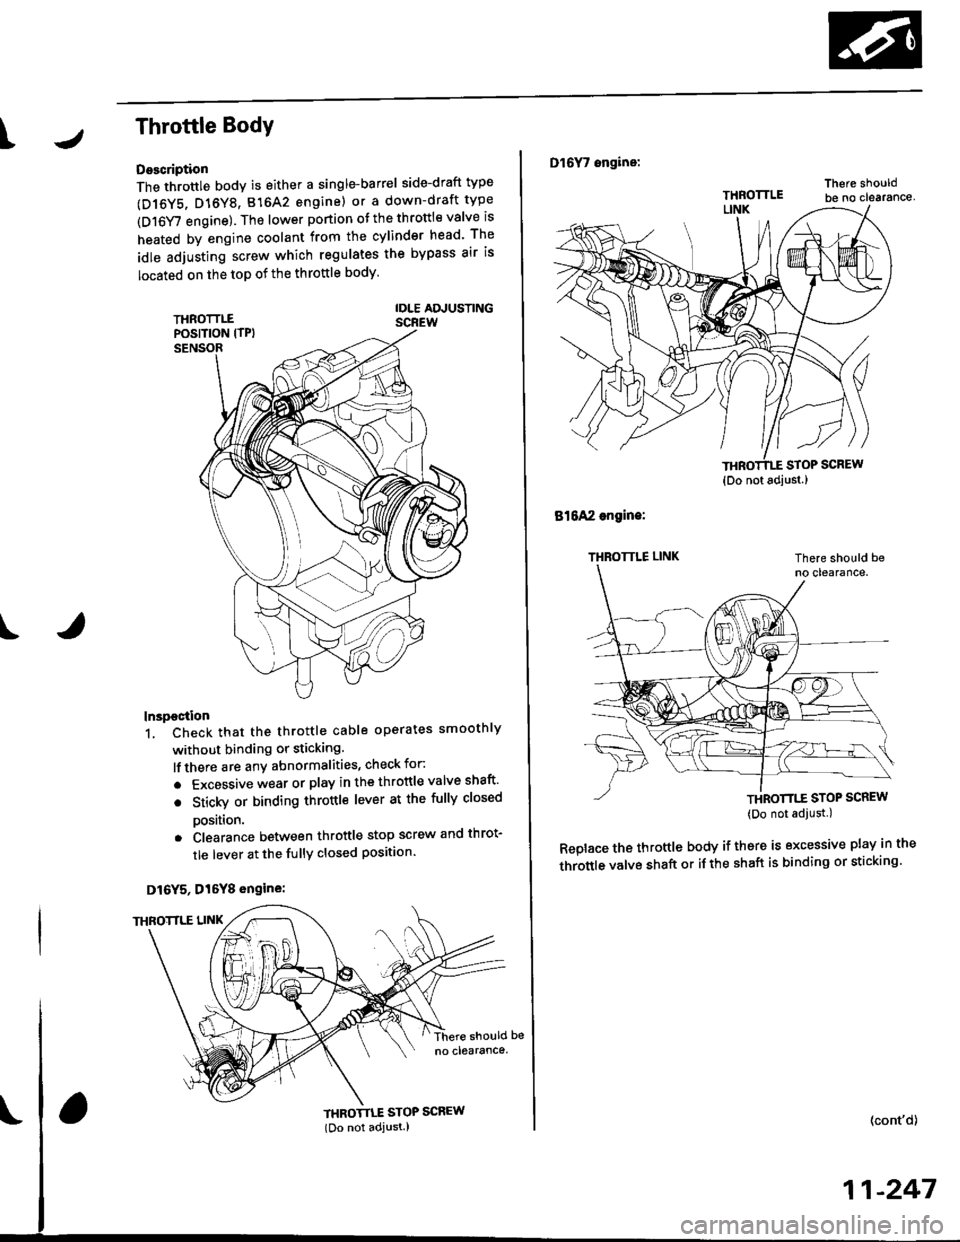 HONDA CIVIC 1996 6.G User Guide IThrottle BodY
Description
The throttle bodY is either a single-barrel side-draft type
(D16Y5, D16Y8, 816A2 engine) or a down-draft type
(D16Y/ engine). The lower portion ot the throttle valve is
heat